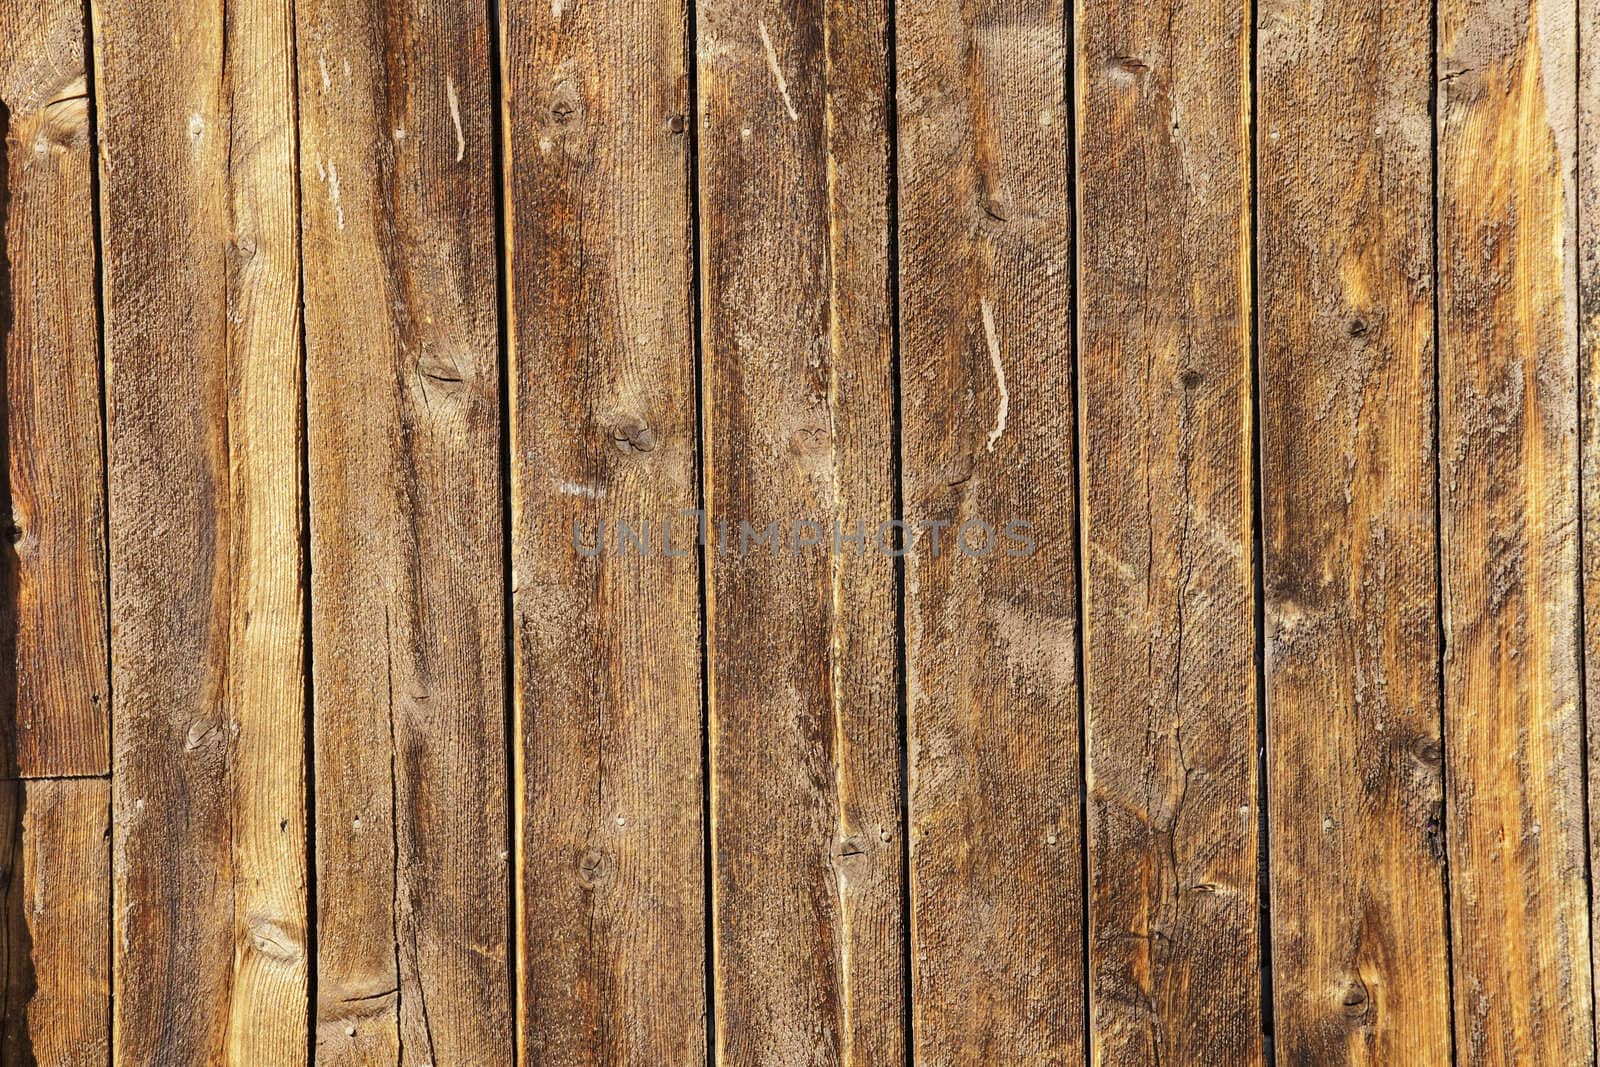 Old weathered wood planks off the side of a cabin deep in the forest, great texture details.